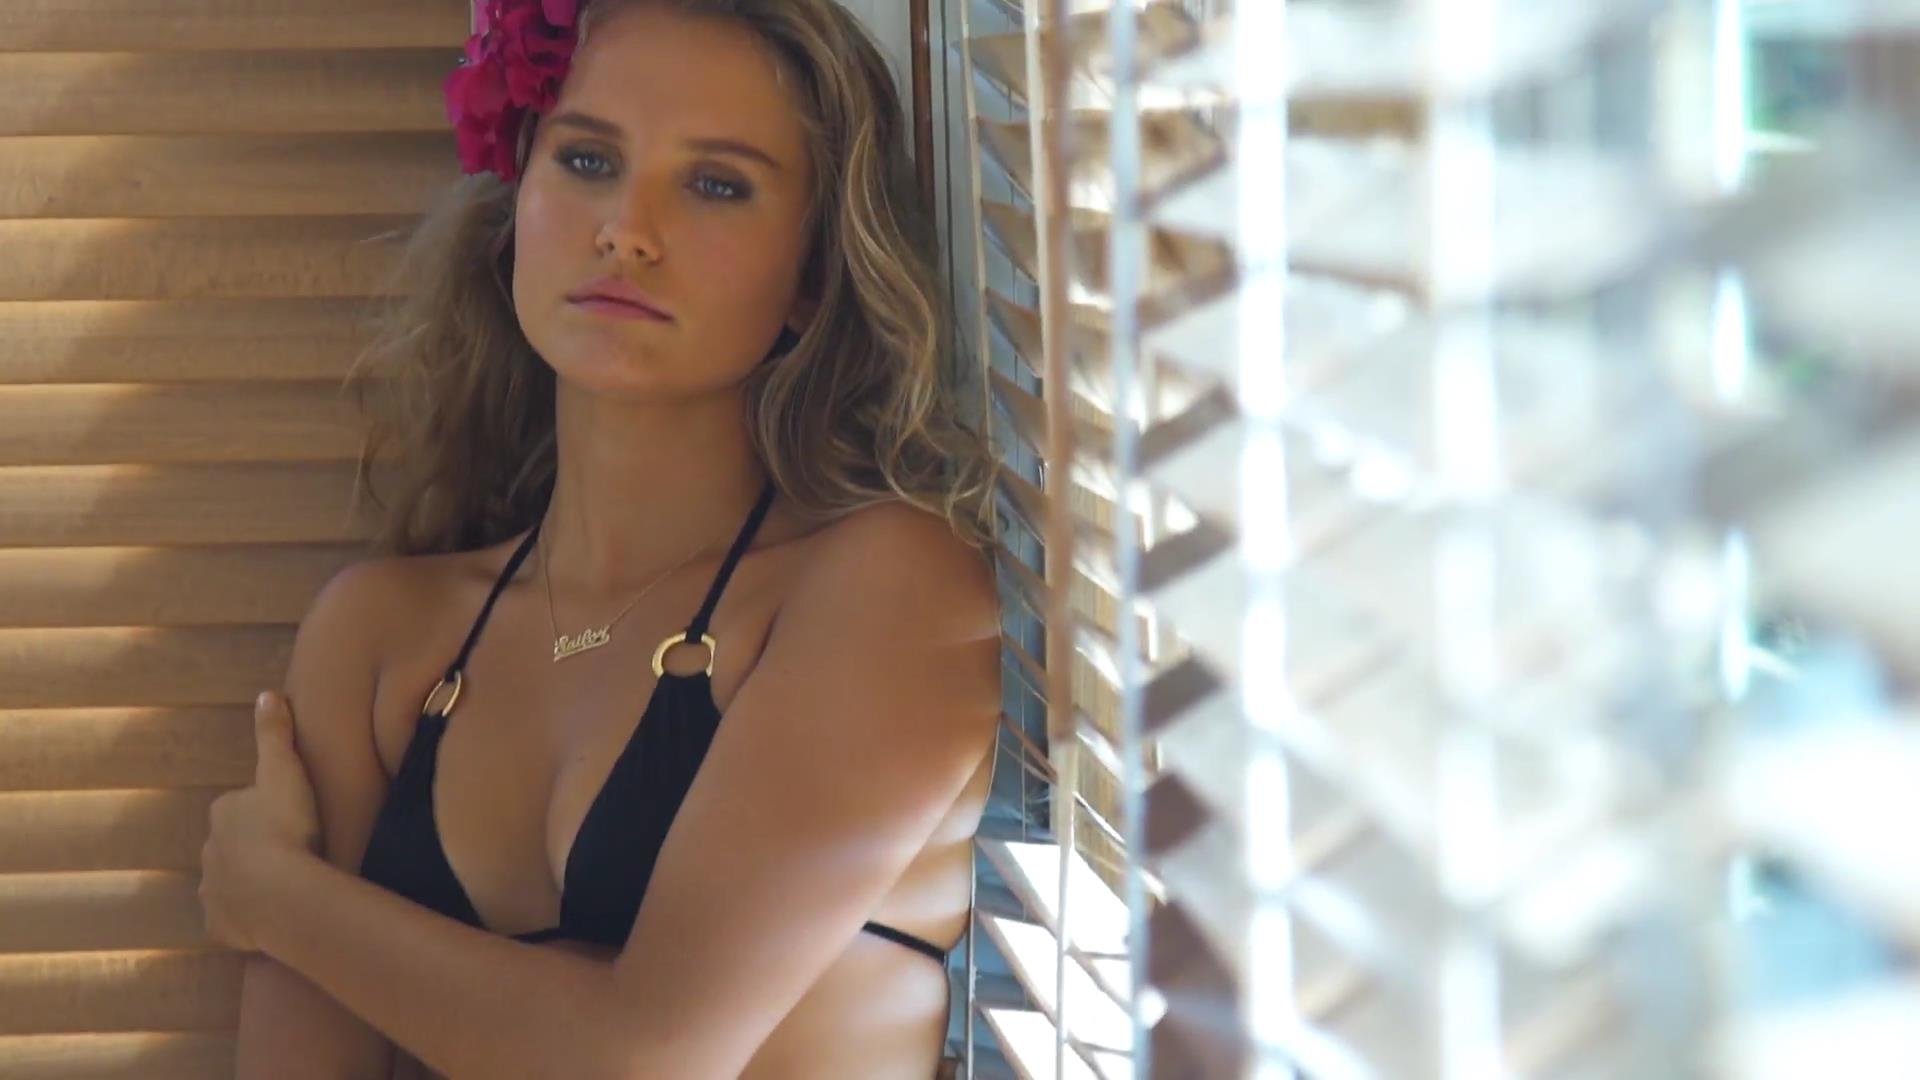 Check out new sexy photos of Sailor Brinkley Cook with her sister Alexa Ray...